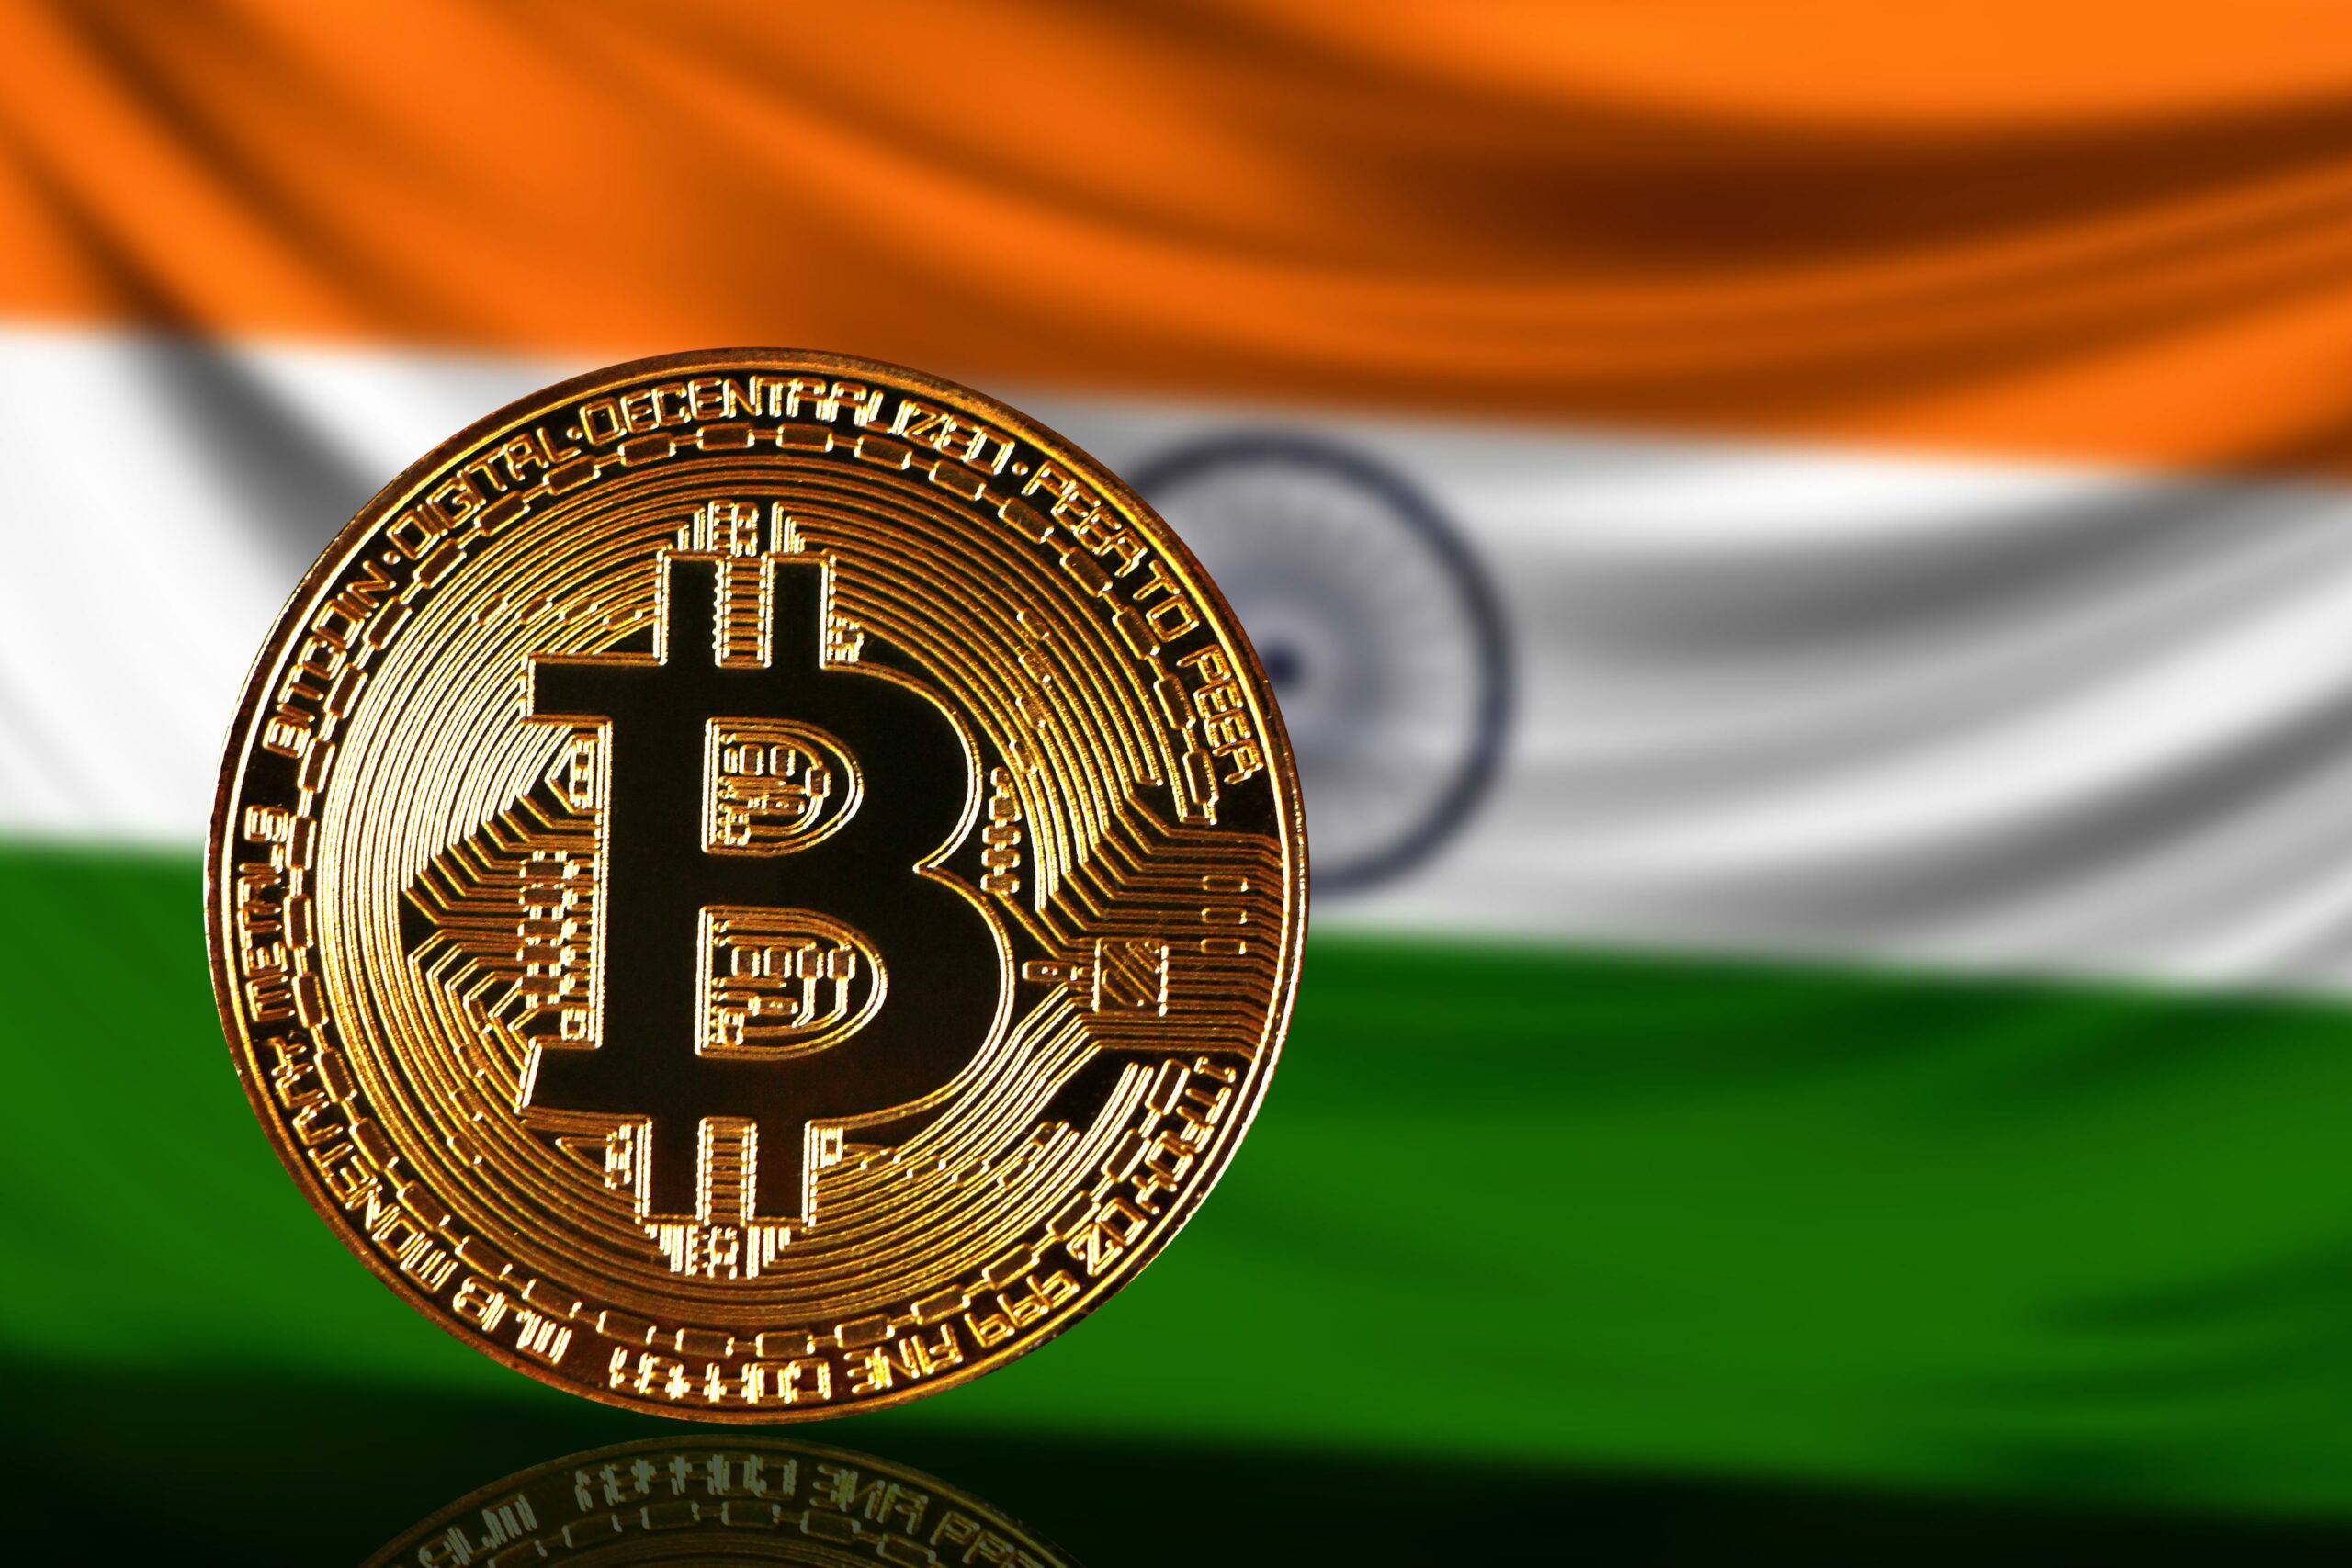 The Indian government is constantly monitoring crypto